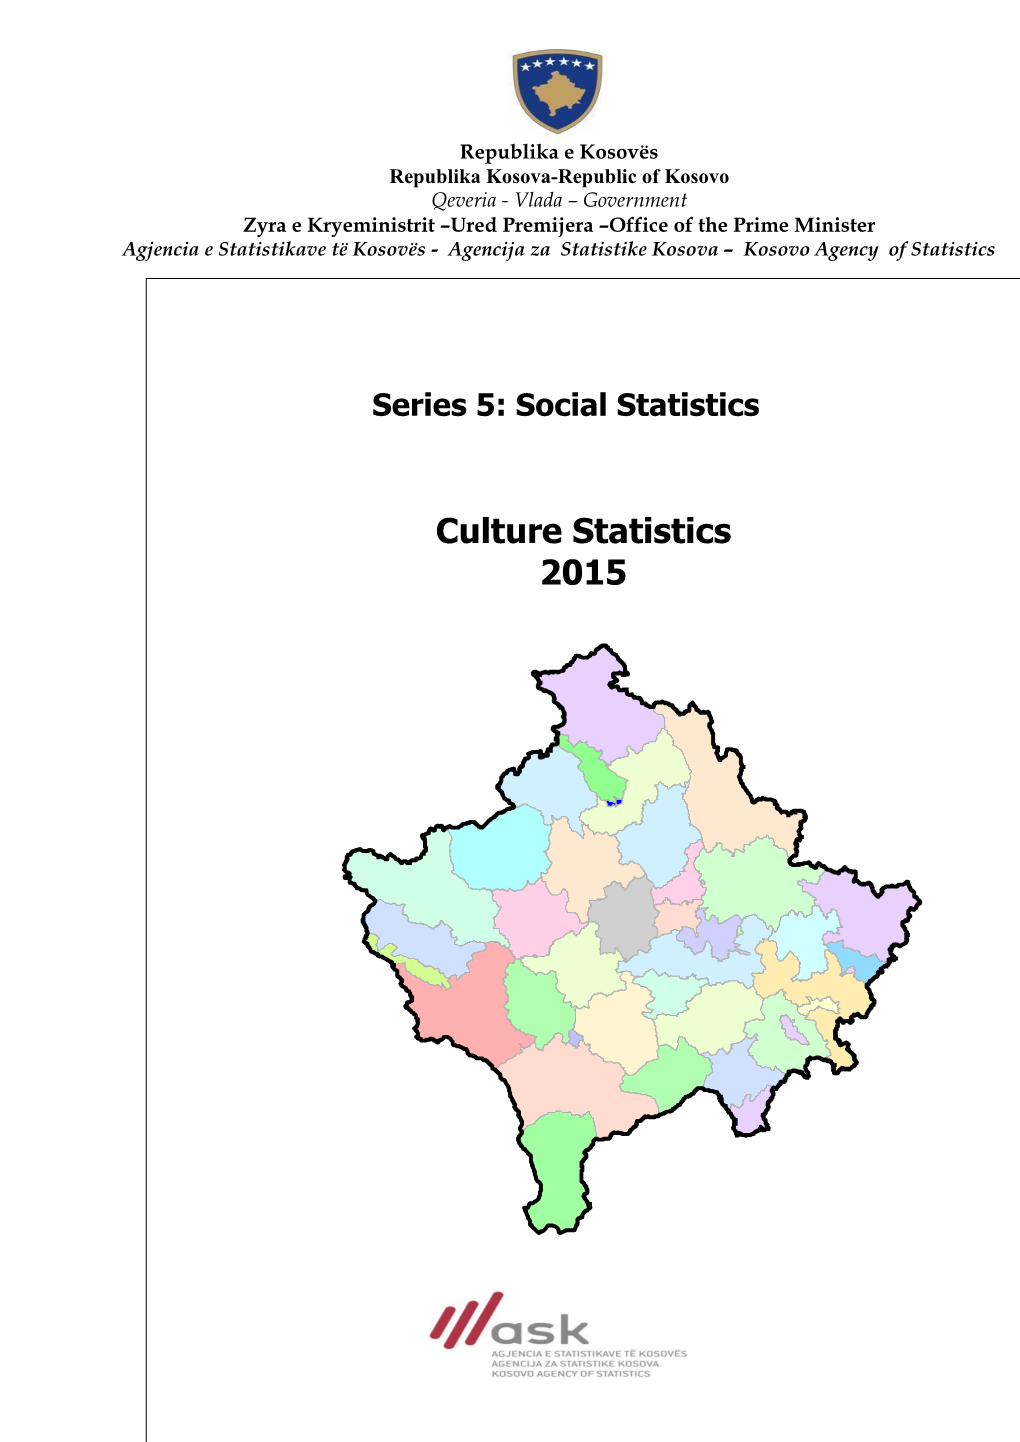 Information About Culture Statistics, 2015